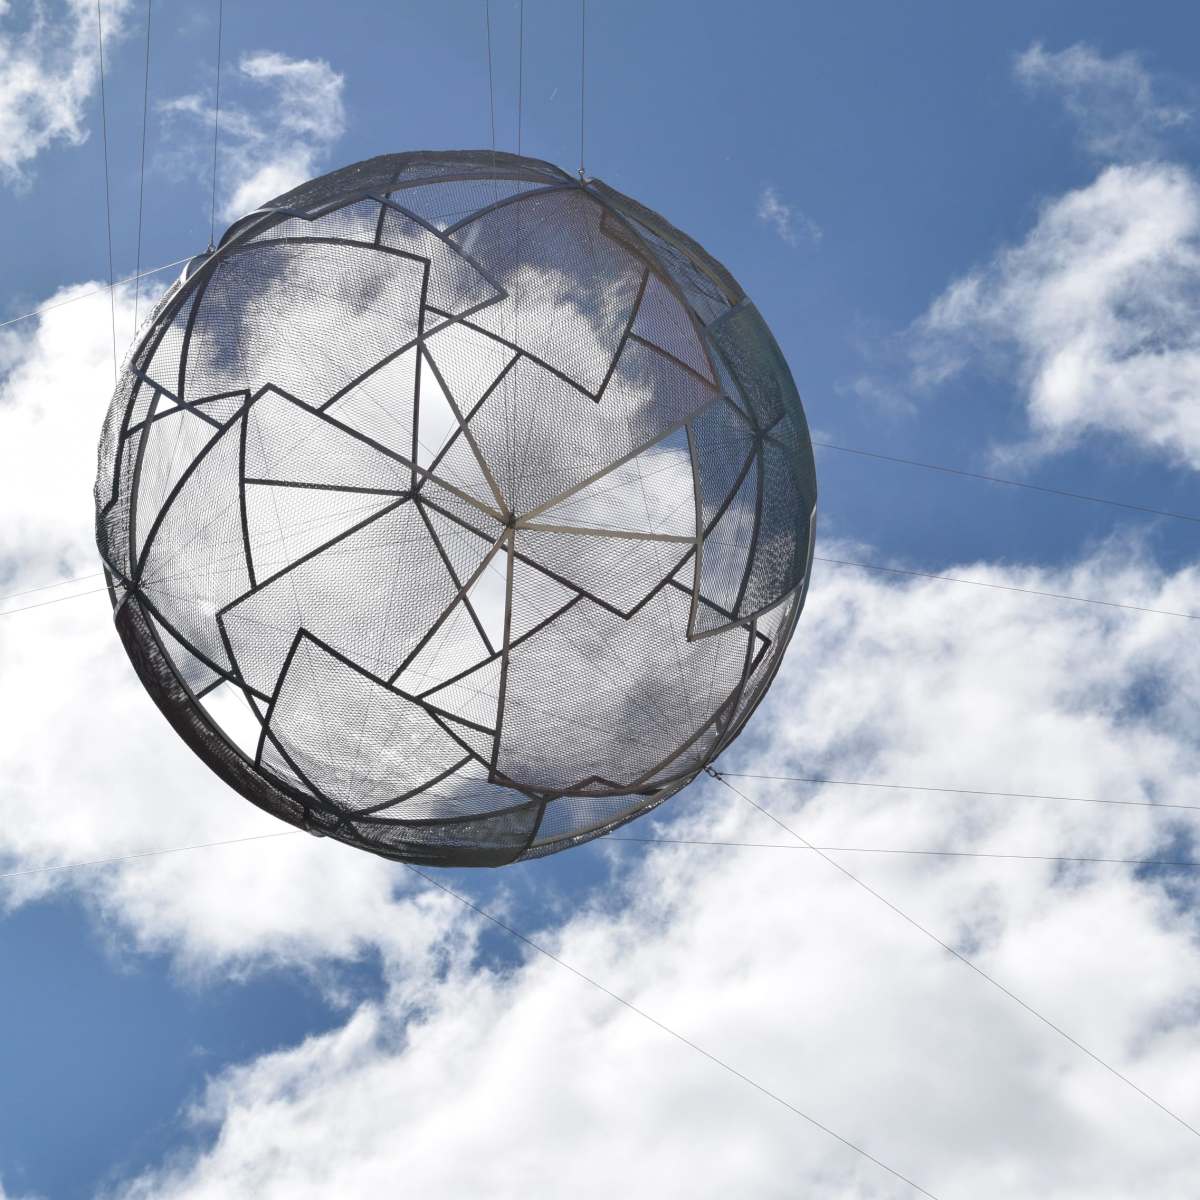 A metal sphere suspended in the air against a blue sky with clouds